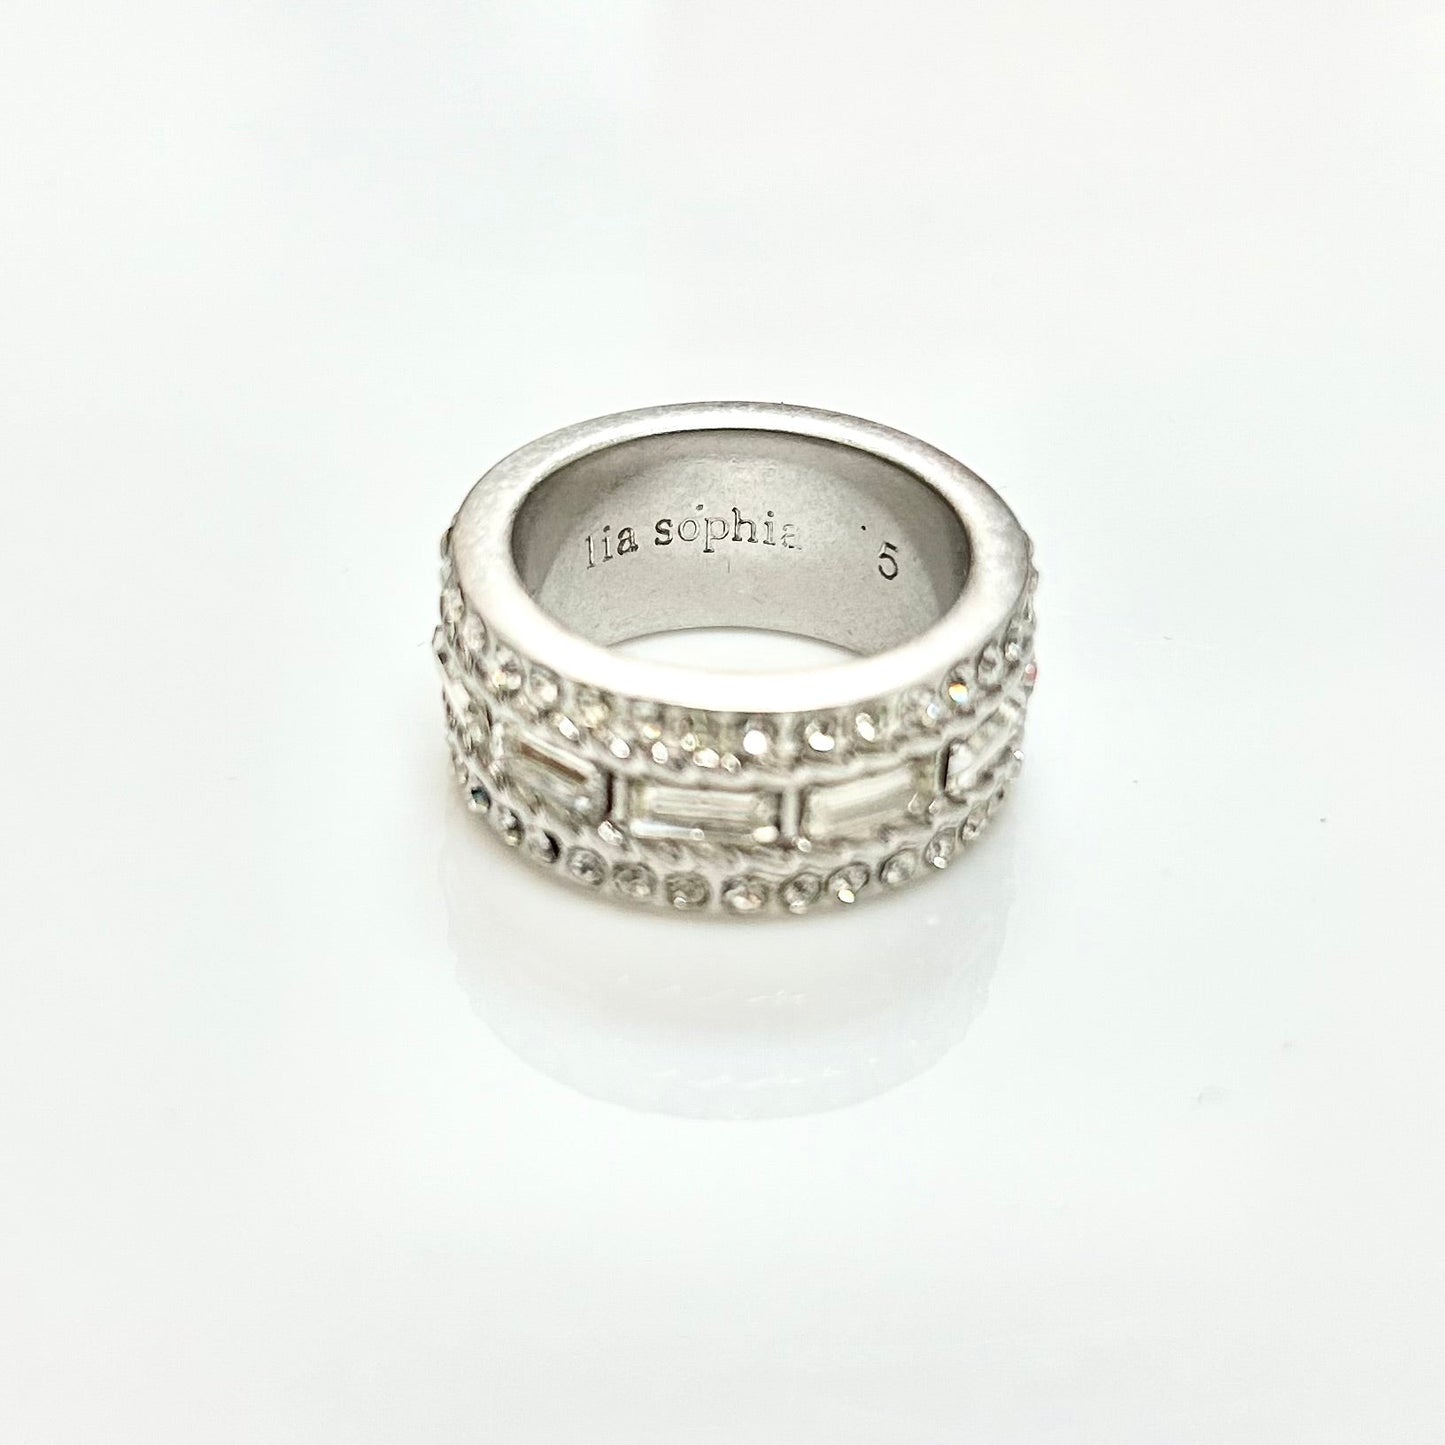 Ring Band By Lia Sophia Jewelry  Size: 5